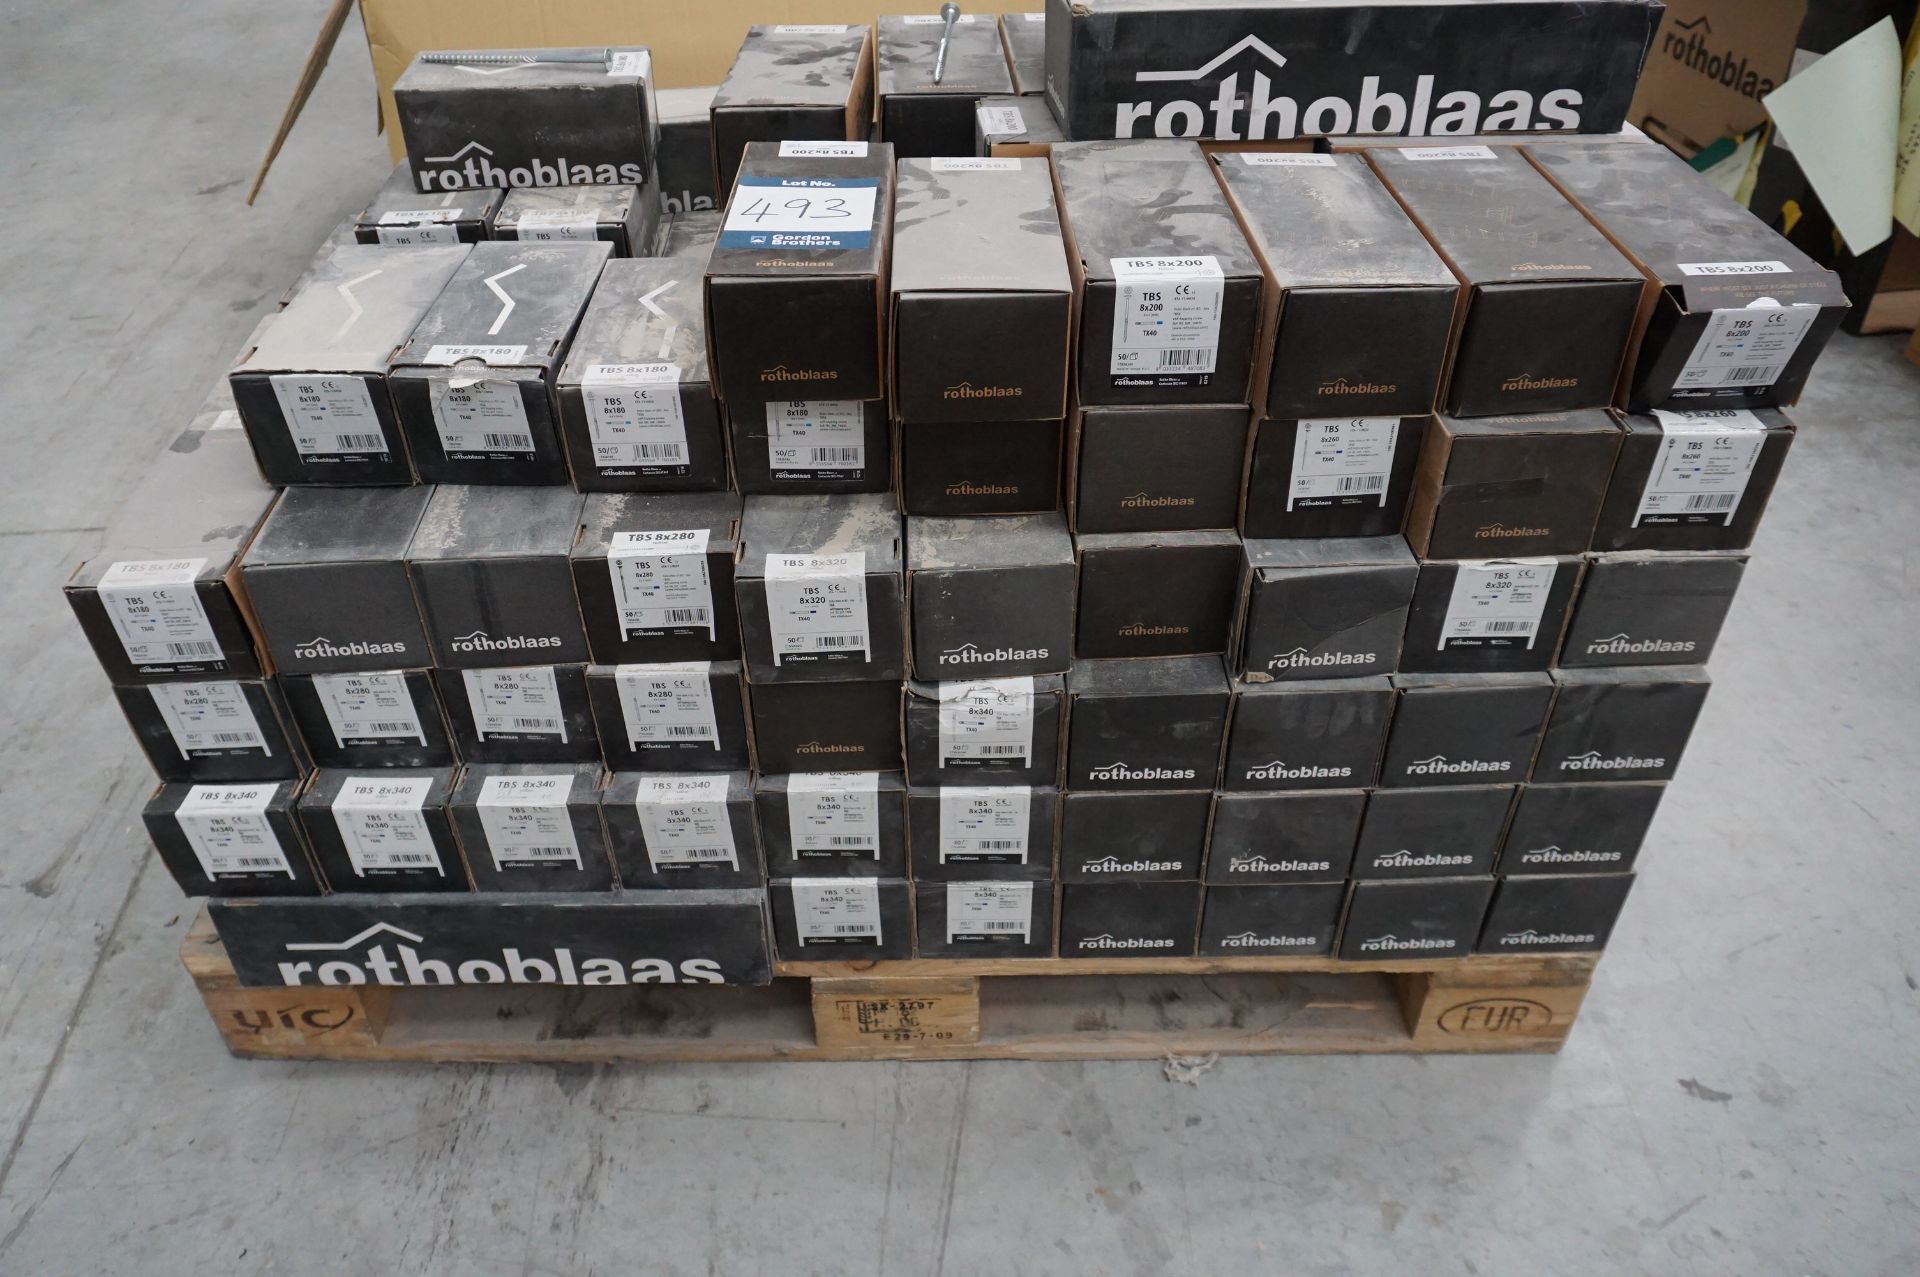 1x (no.) pallet box of mixed Rothoblaas screws to include TBS 8 x 200mm self tapping wood screws,